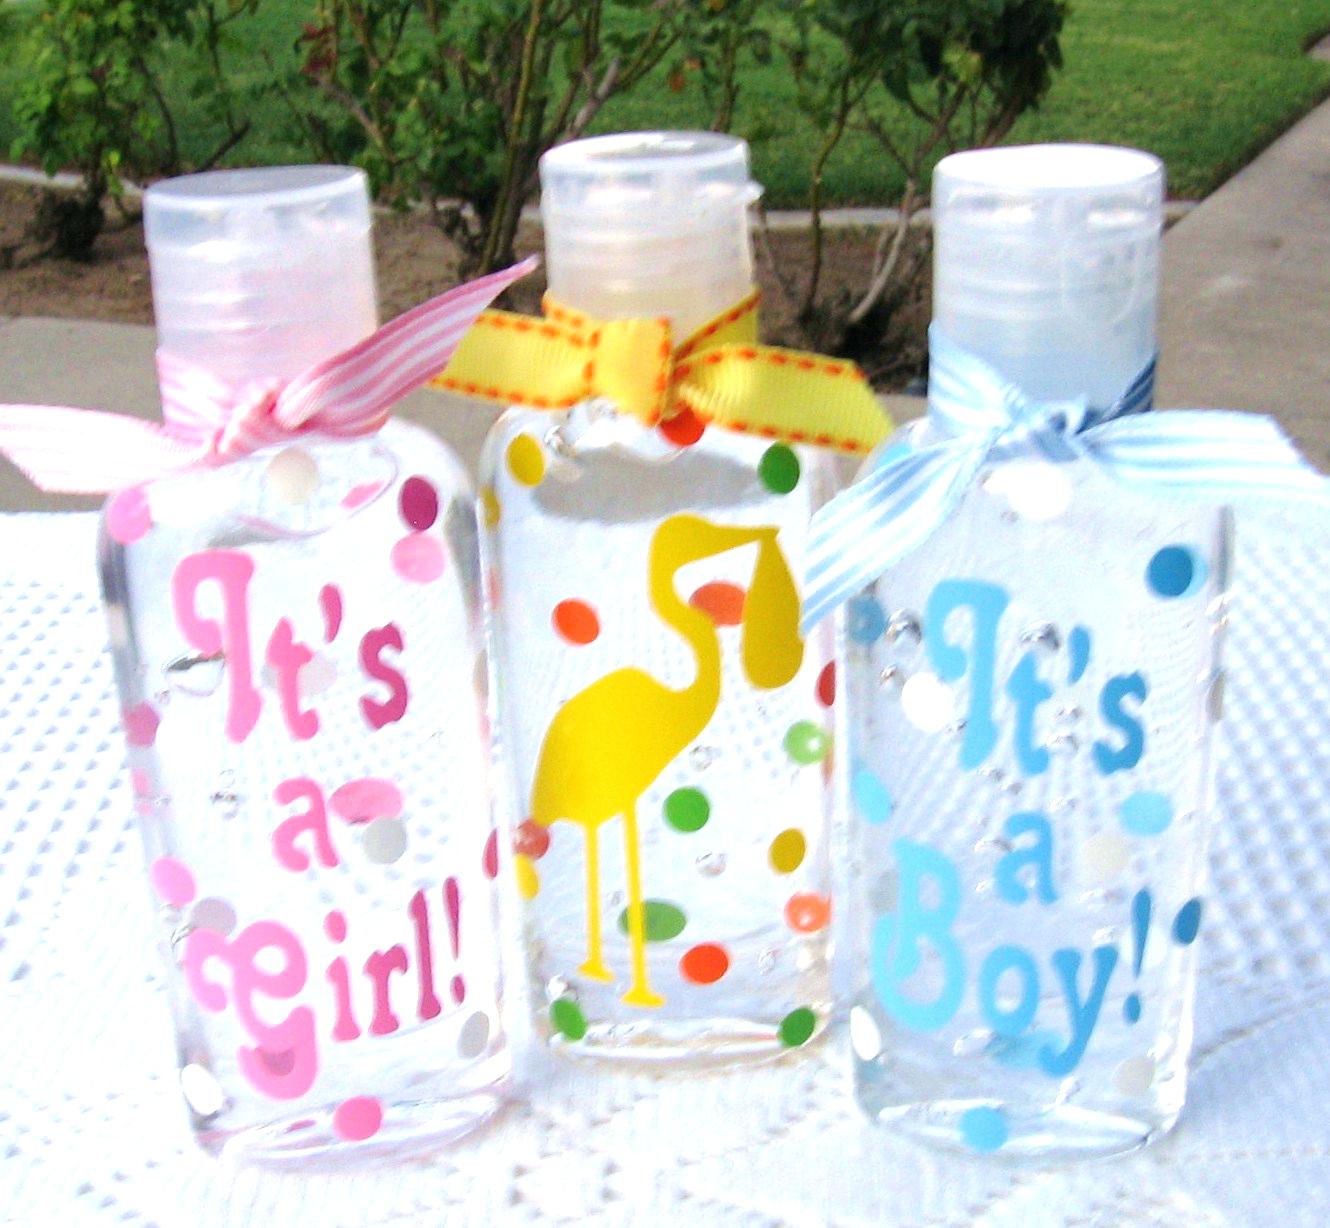 Full Size of Baby Shower:enamour Baby Shower Gifts For Guests Picture Ideas Baby Shower Gifts For Guests Para Baby Shower Baby Shower Hostess Gifts Baby Shower Word Search Baby Shower Sayings Baby Shower Cakes Baby Shower Gift For Guest Twins Decorations Best Decoration Giftss